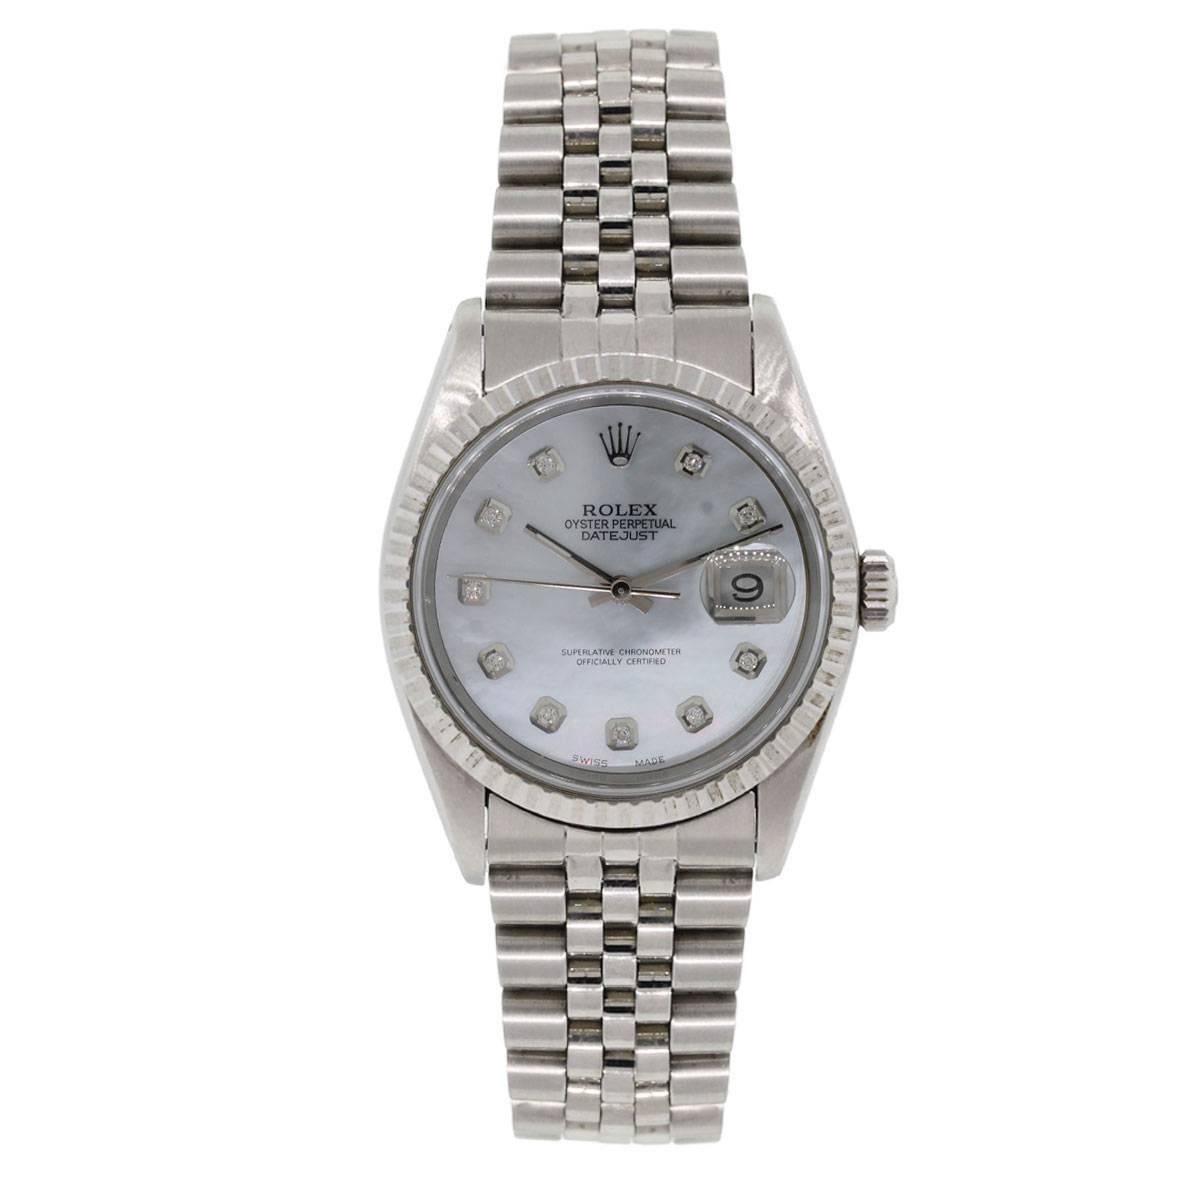 Brand: Rolex
MPN: 16220
Model: Datejust
Case Material: Stainless steel
Case Diameter: 36mm
Crystal: Scratch resistant sapphire
Bezel: Stainless steel engine turned bezel
Dial: Mother of pearl diamond dial with date window at the 3 o’clock position